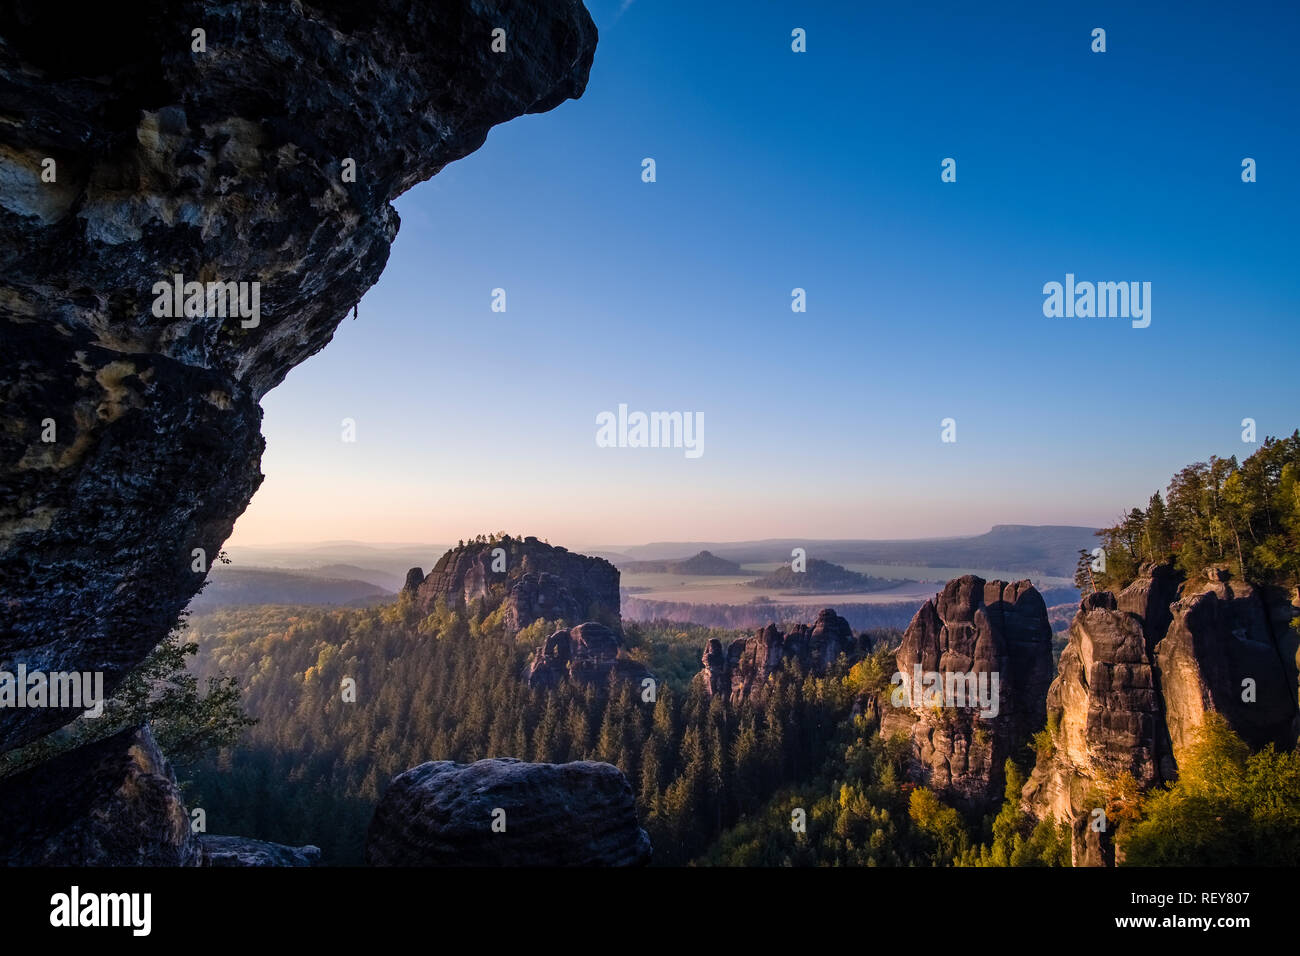 Landscape in the National Park Sächsische Schweiz with rock formations and trees Stock Photo